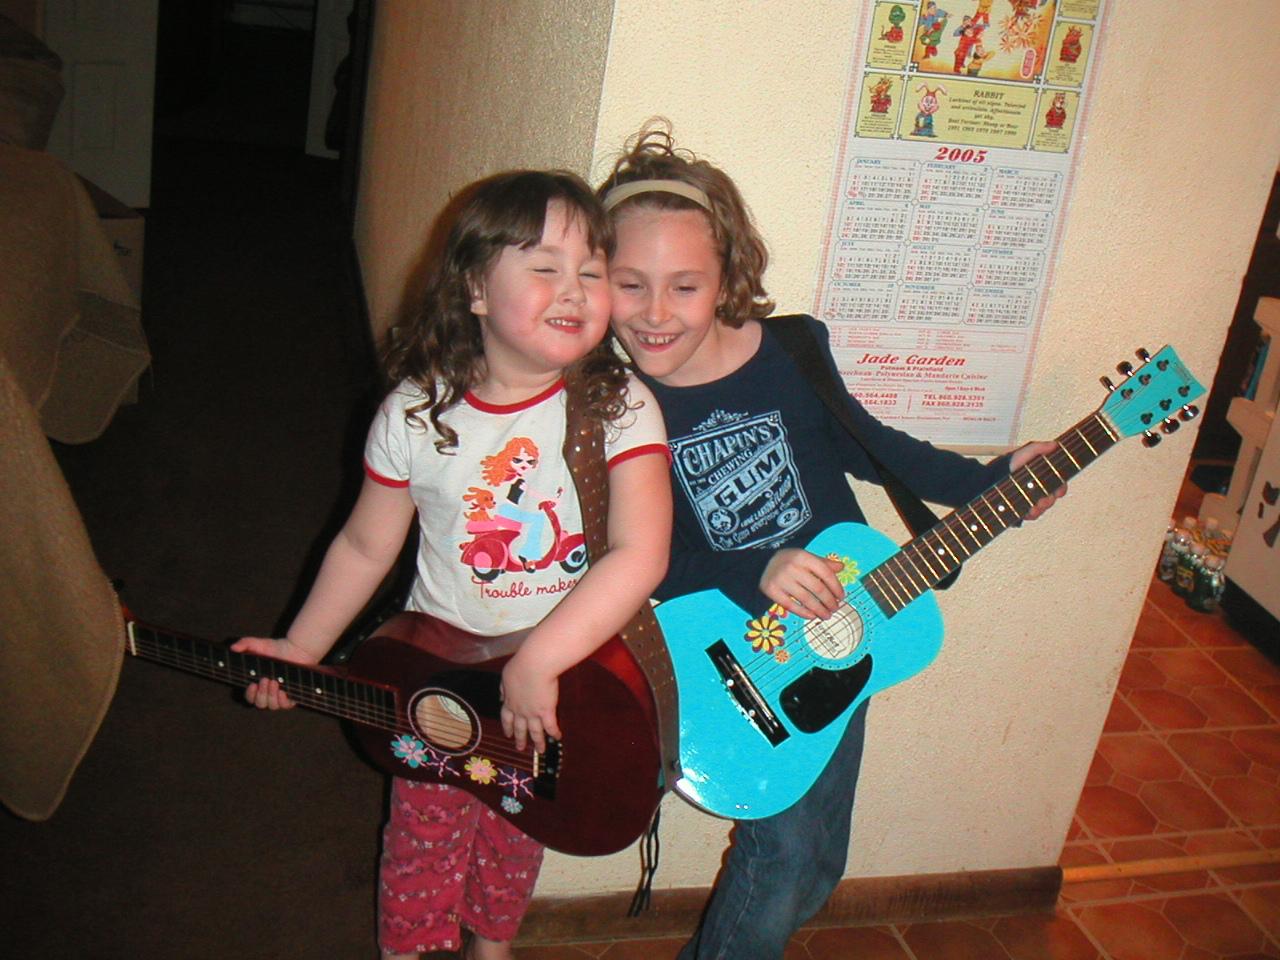 Abi and my little sister Nic with their guitars!